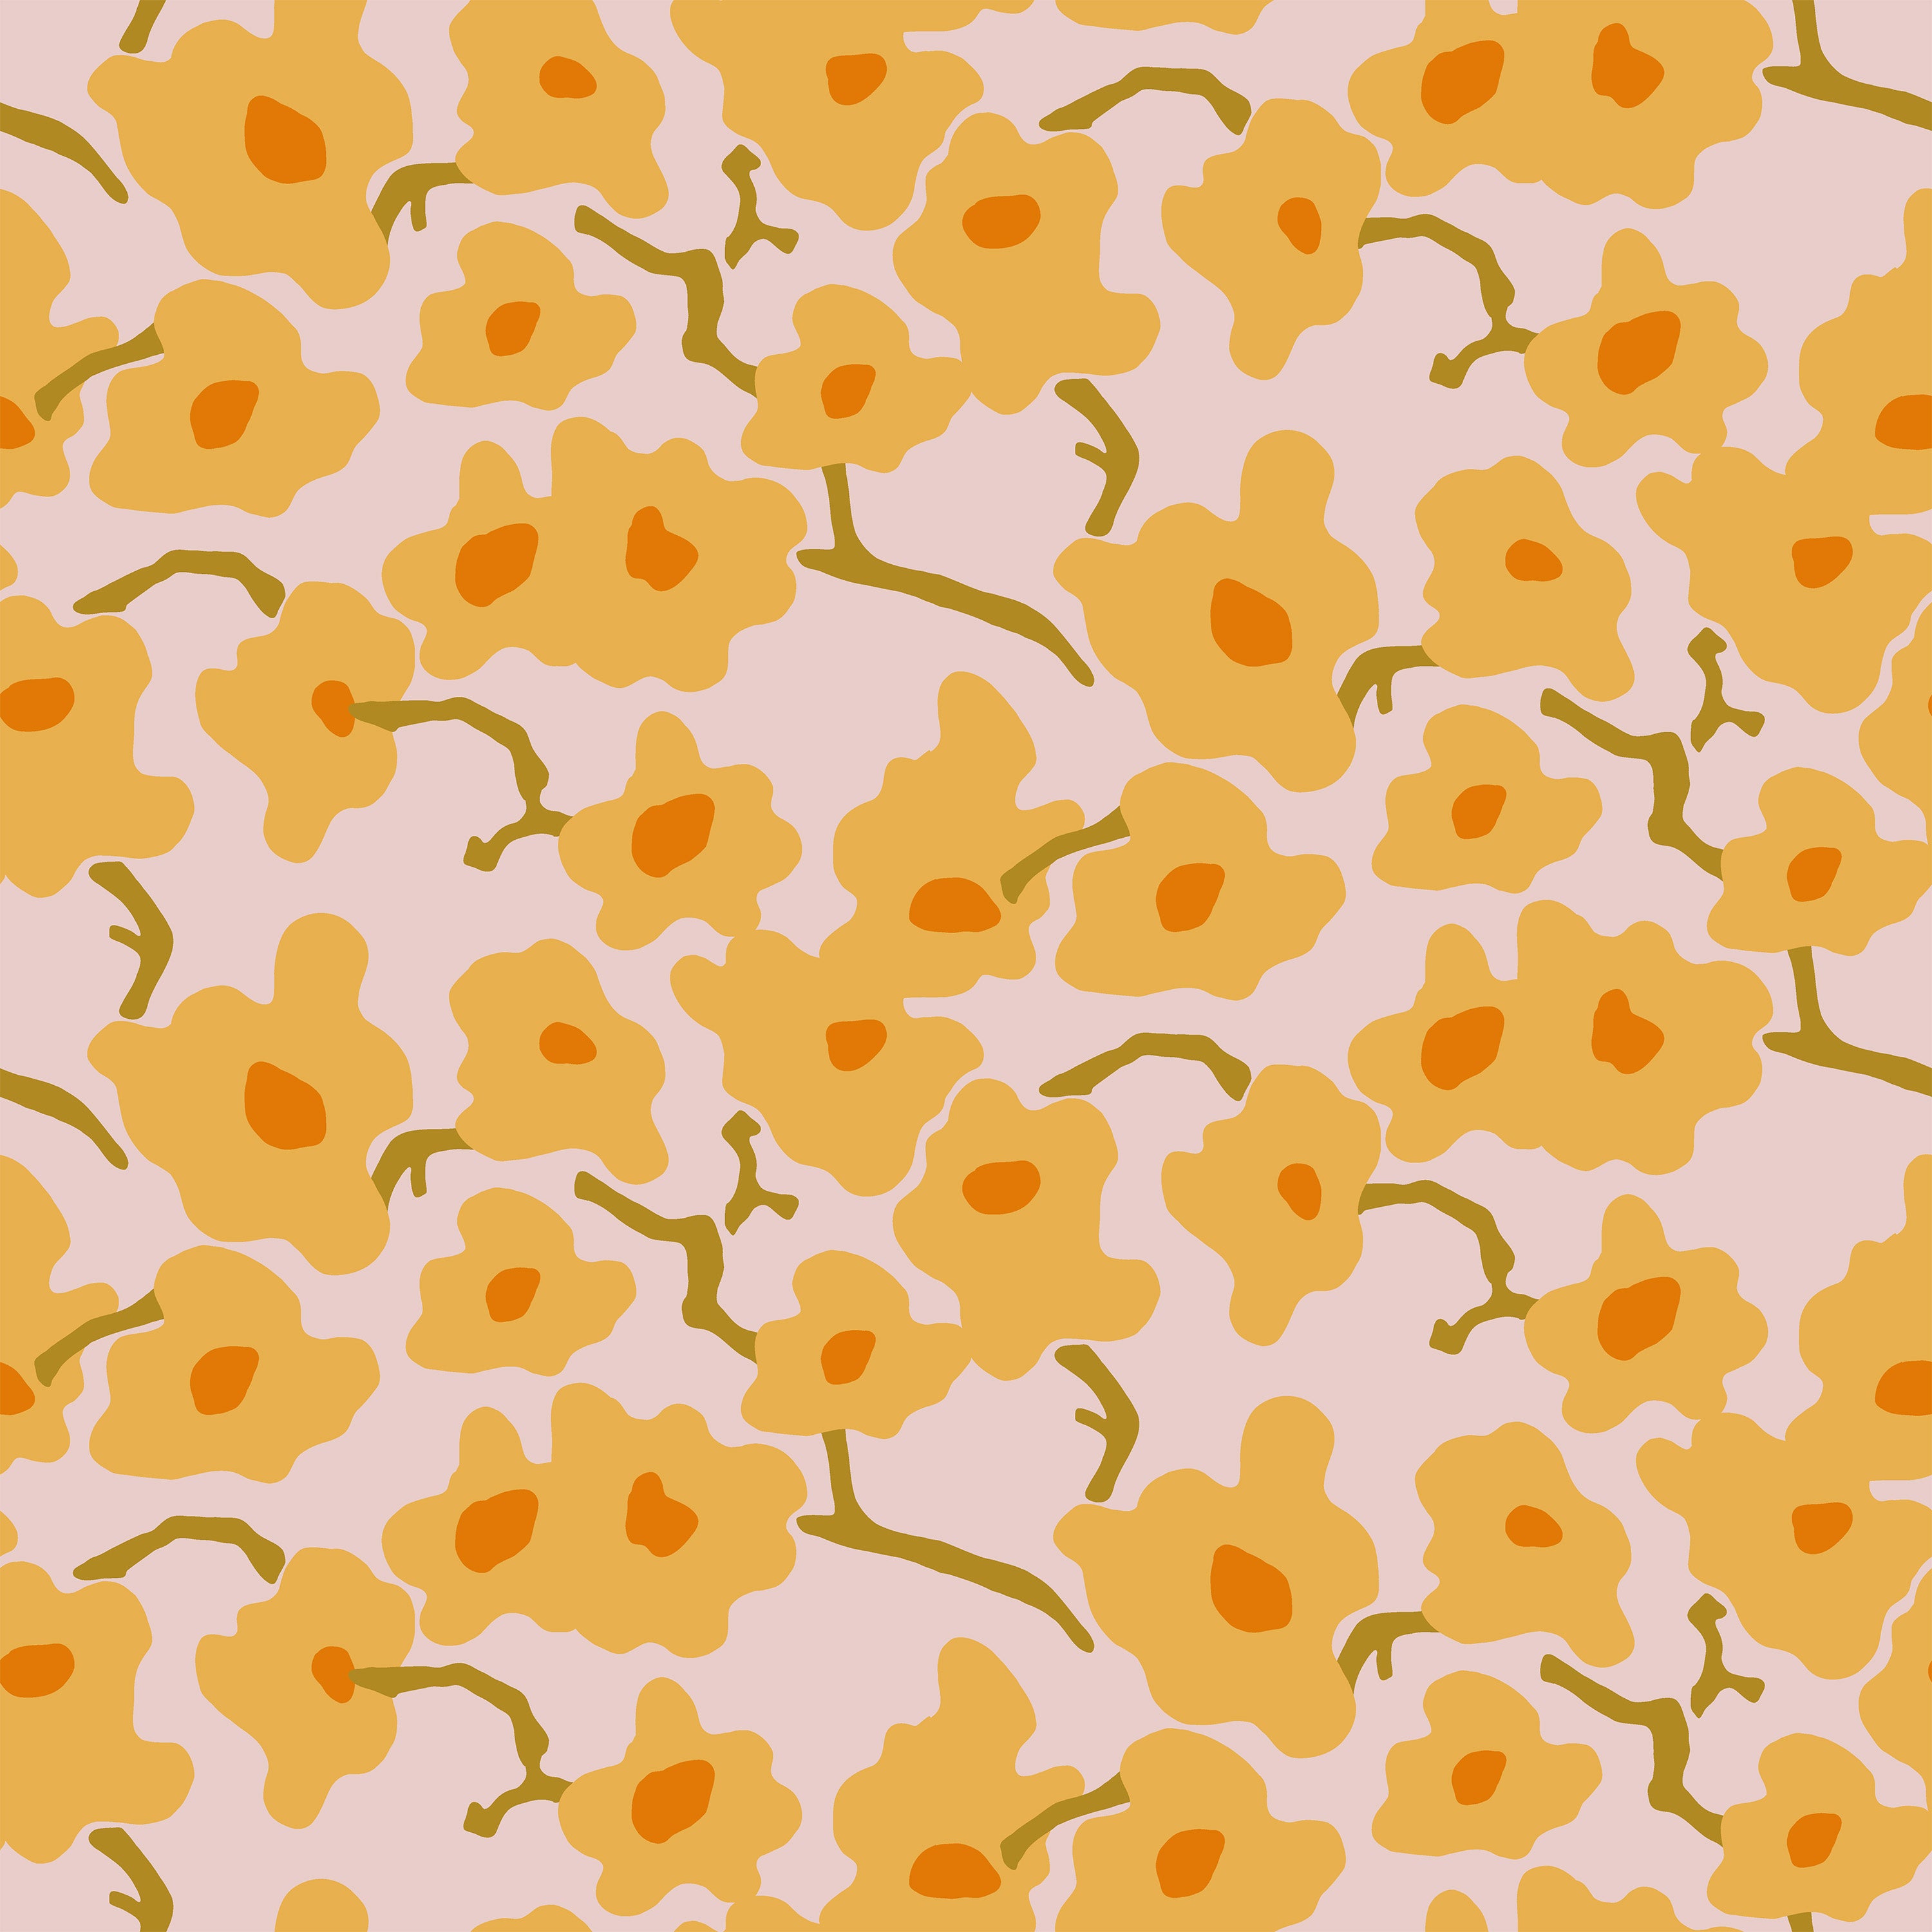 Close-up view of Abstract Meadow Wallpaper showing a playful and colorful floral pattern with small yellow flowers connected by thin stems on a soft pink background. This design brings a lively, spring-like feel to any room.